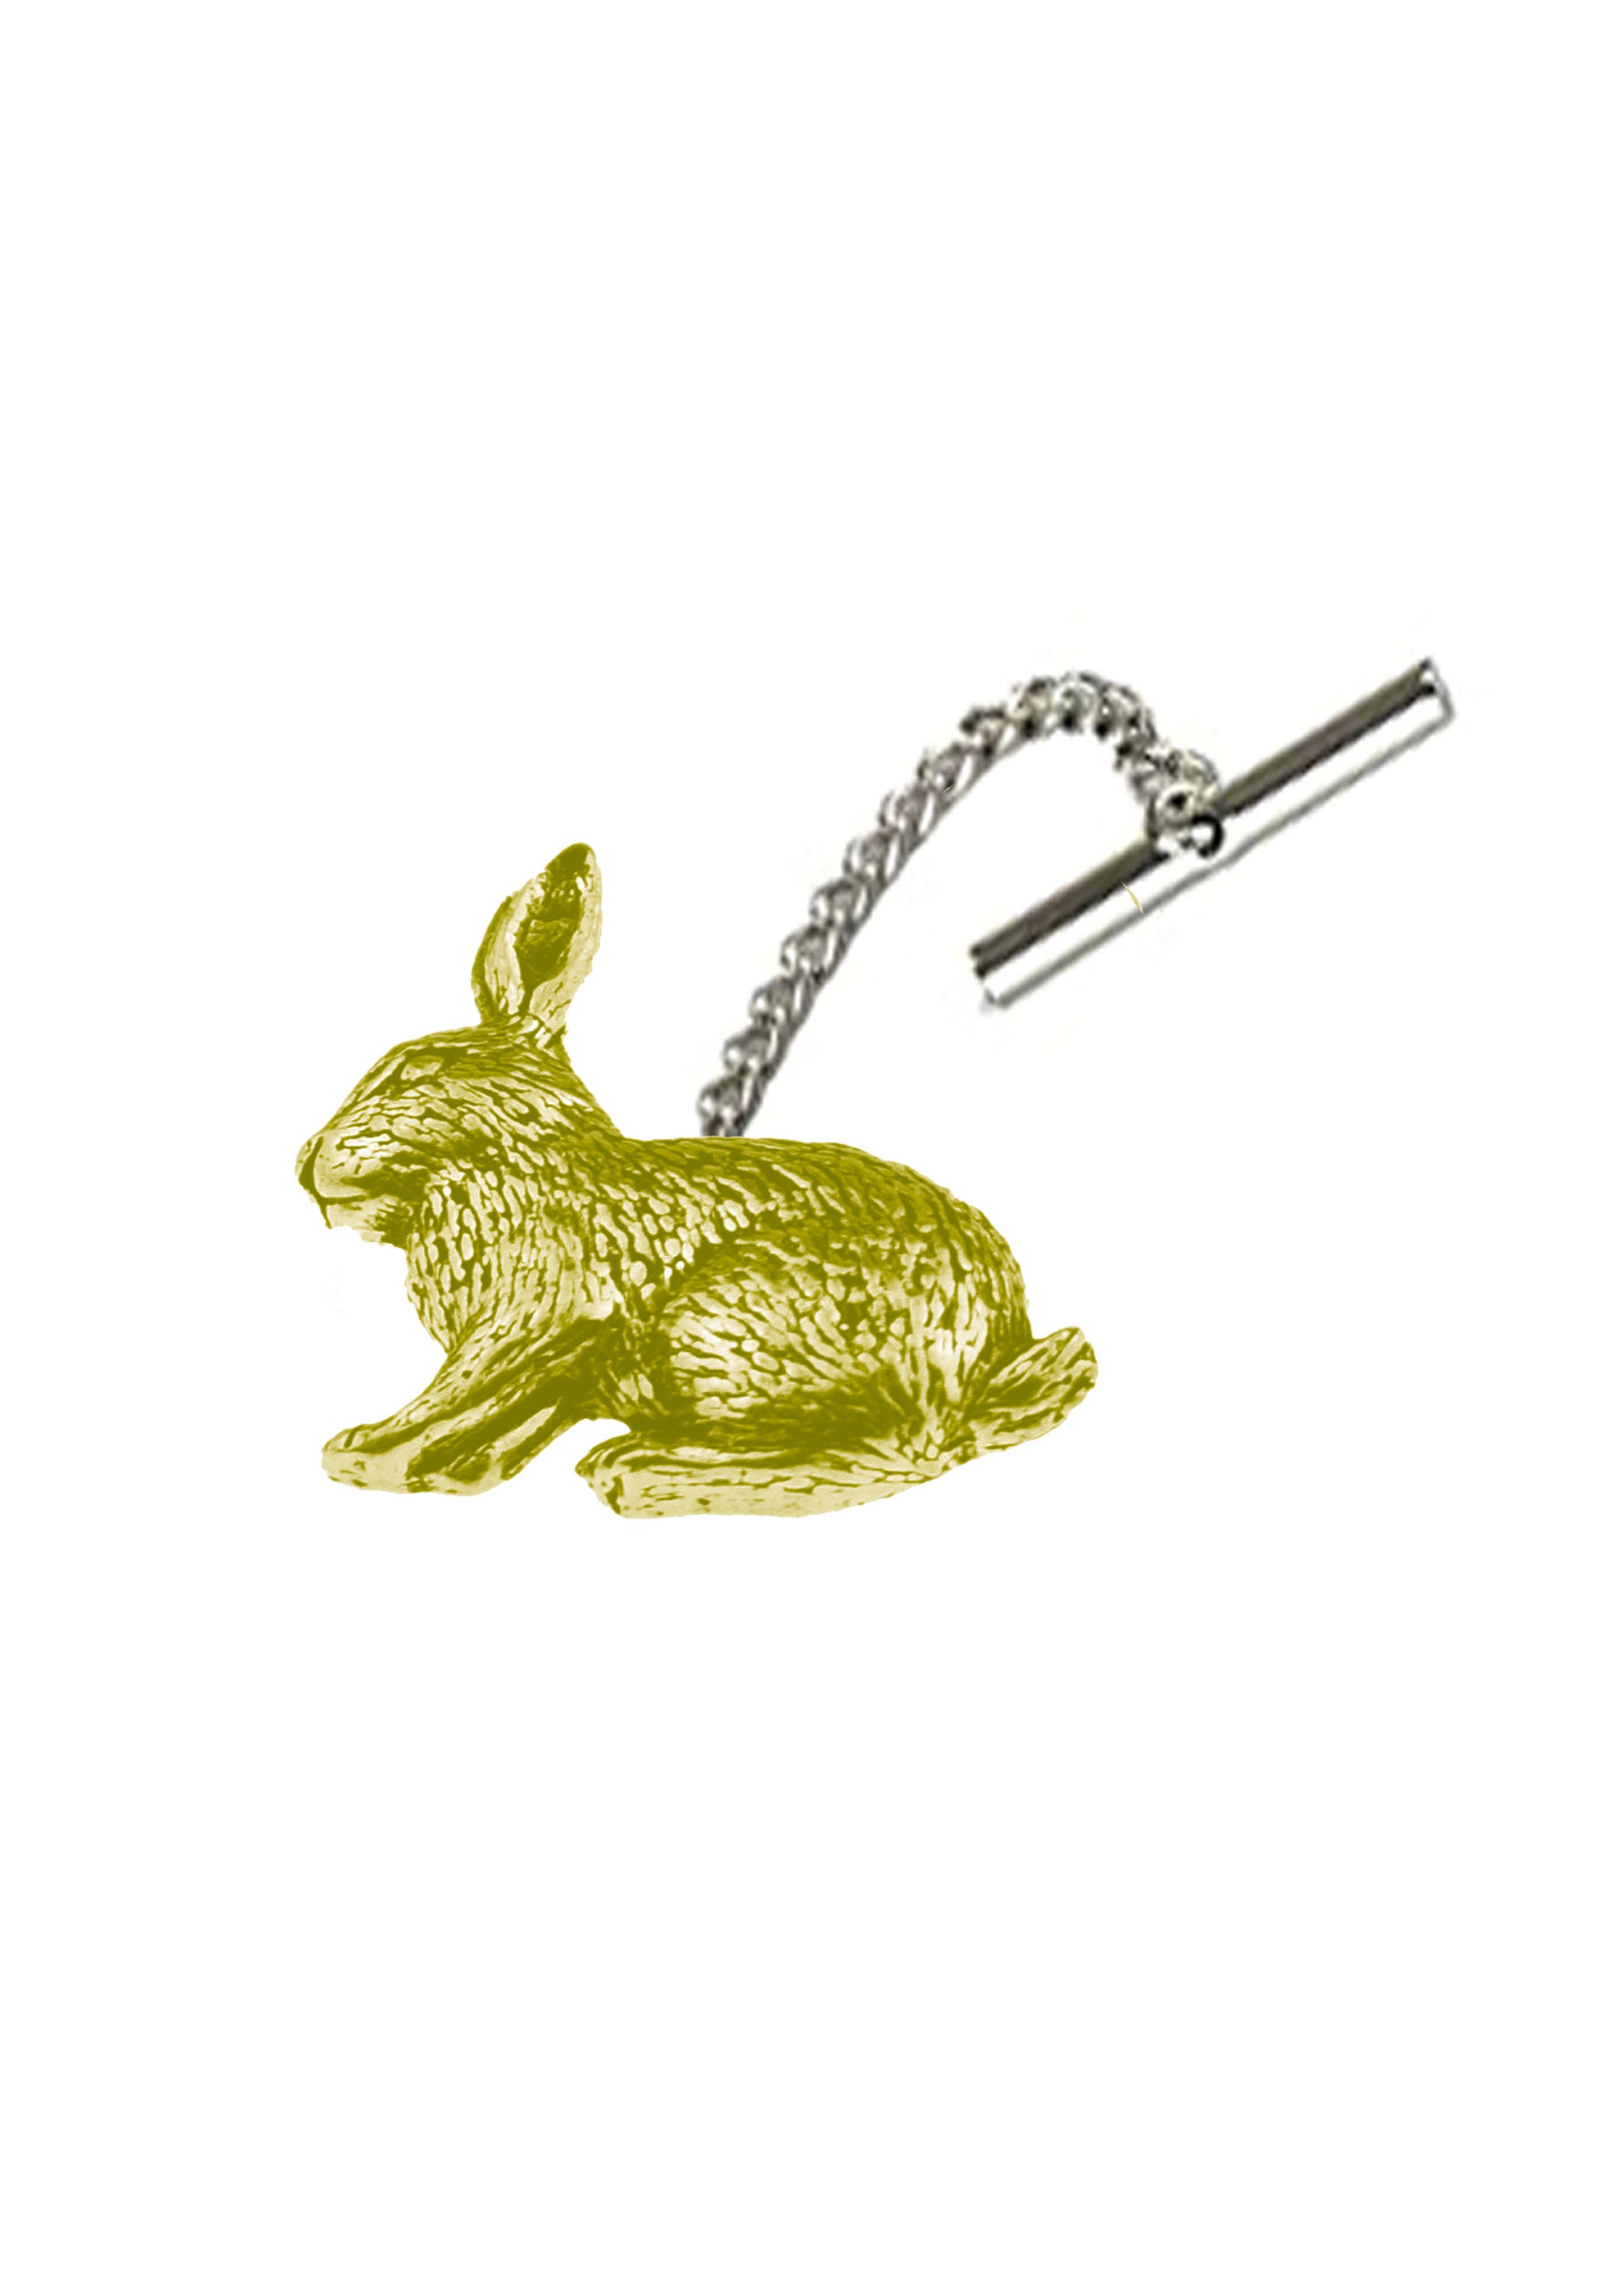 Hare Tie Pin 